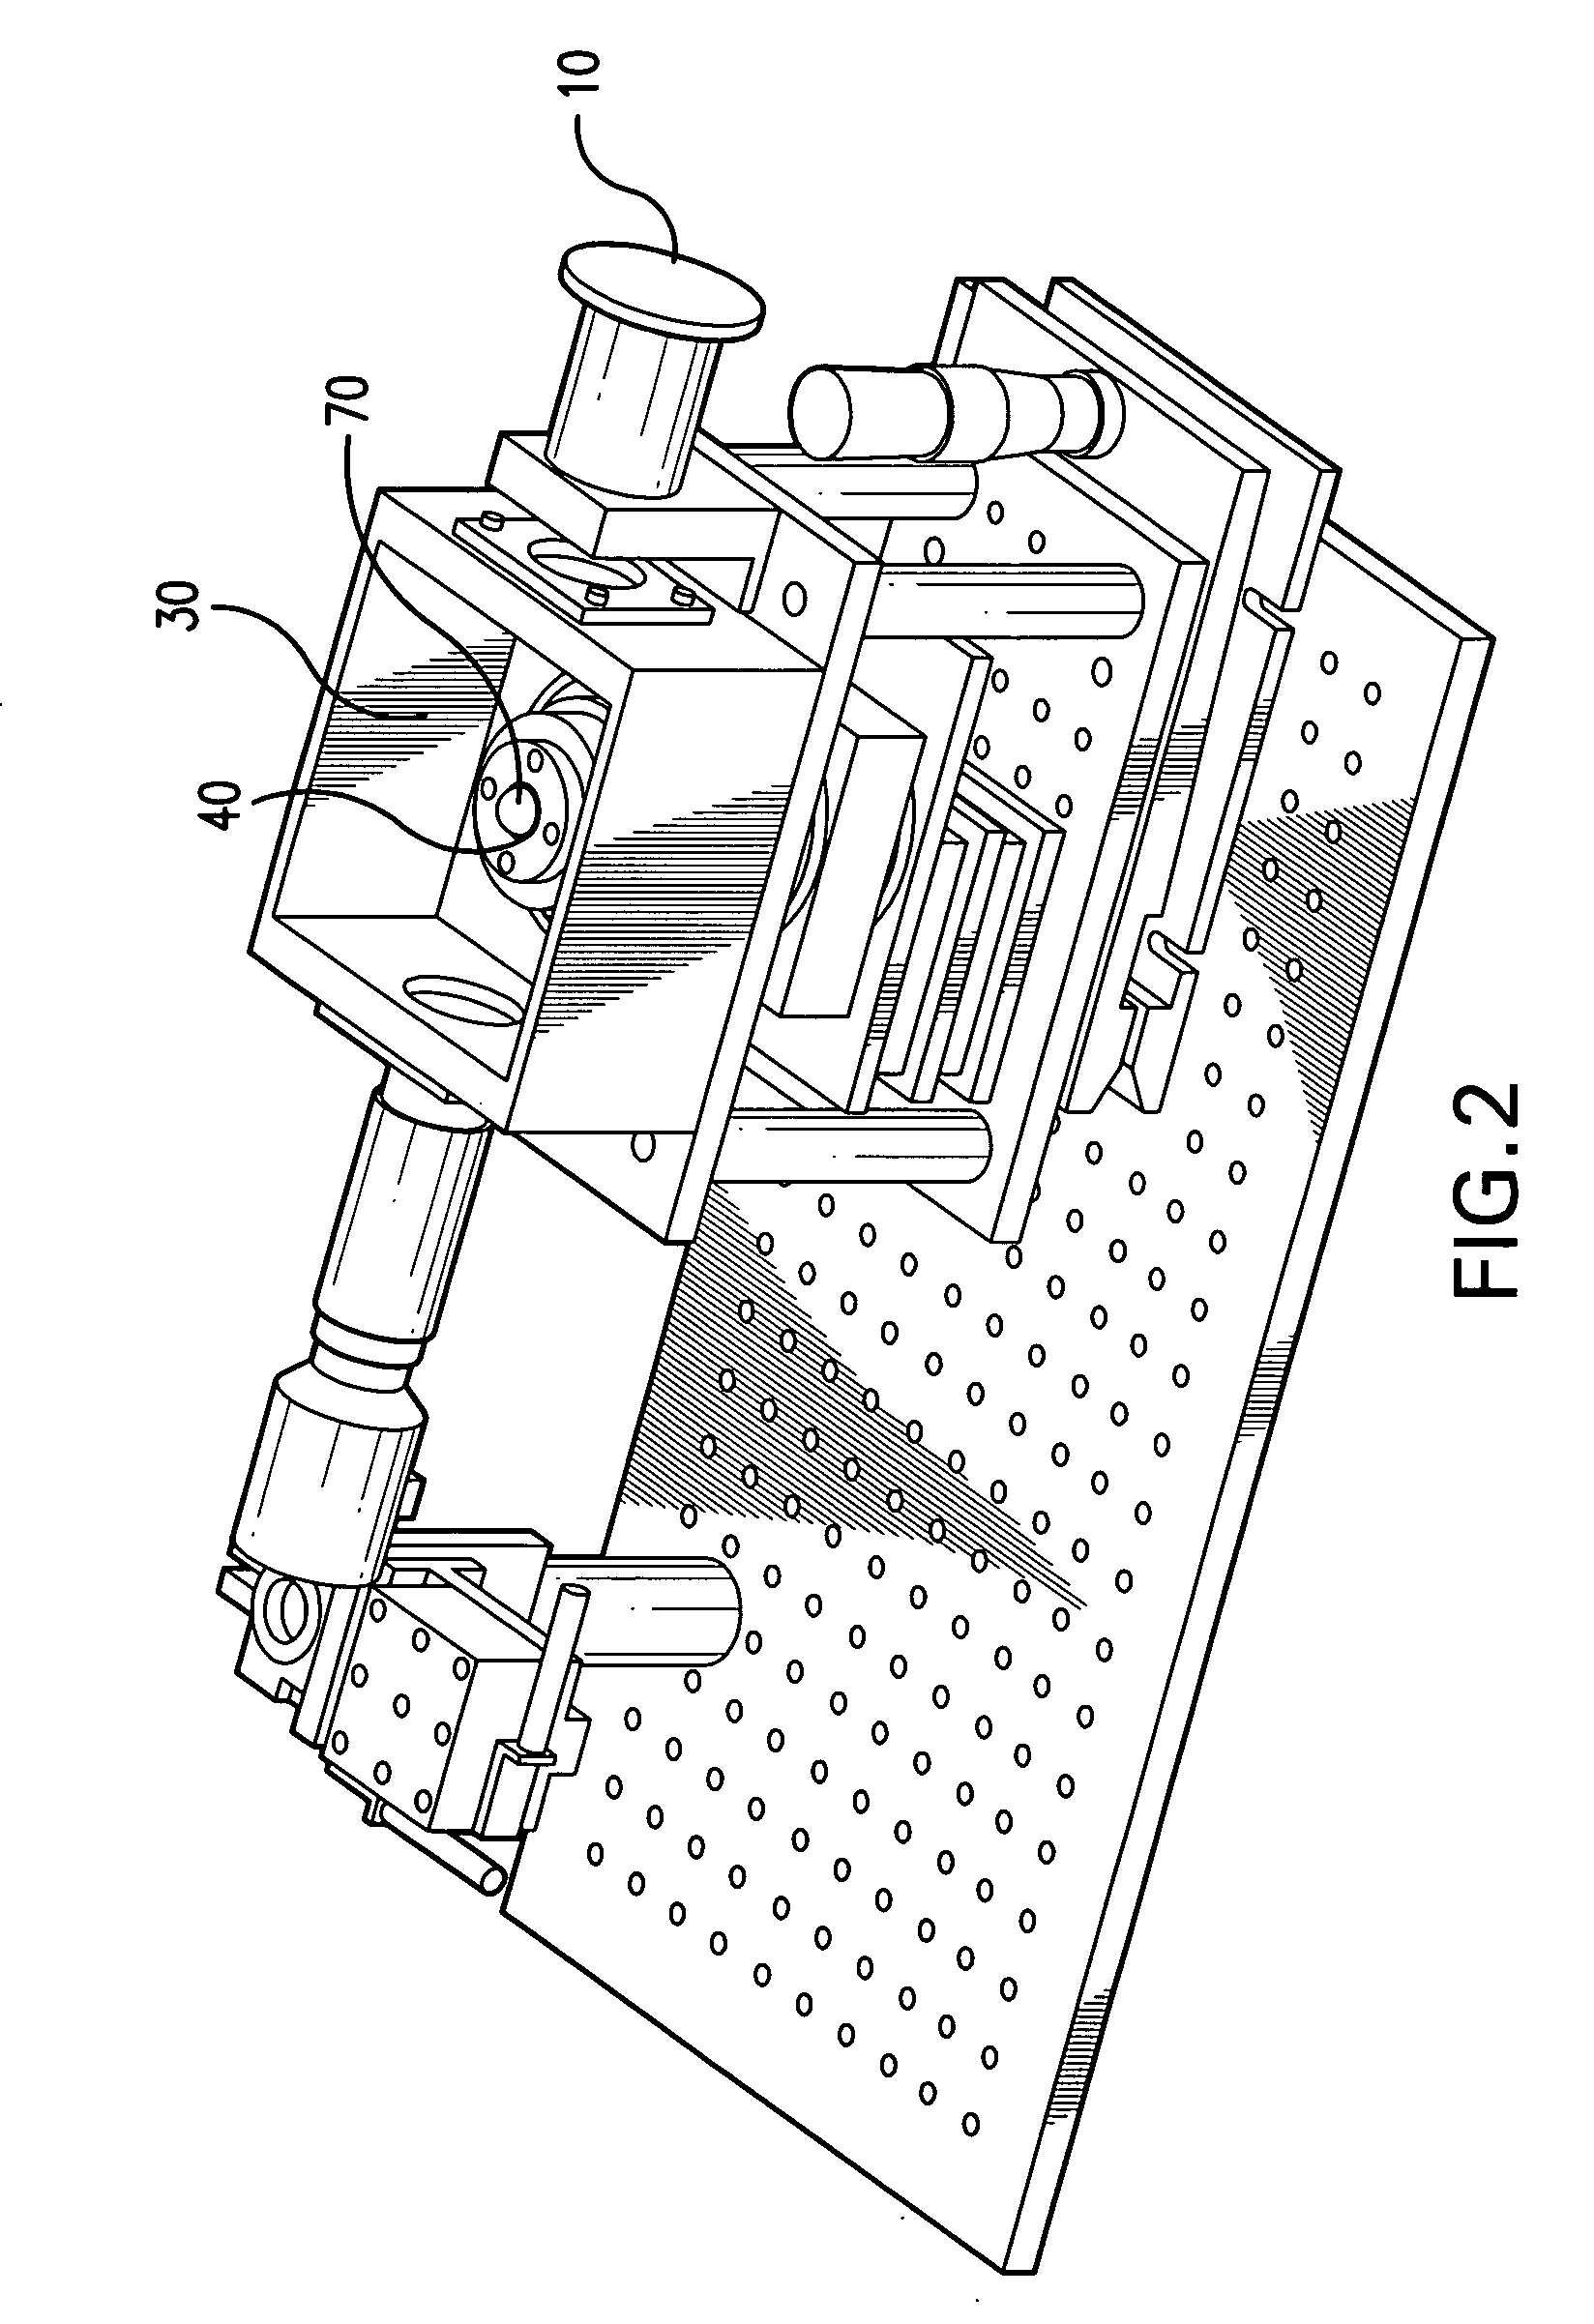 Apparatus and method for detecting lens thickness